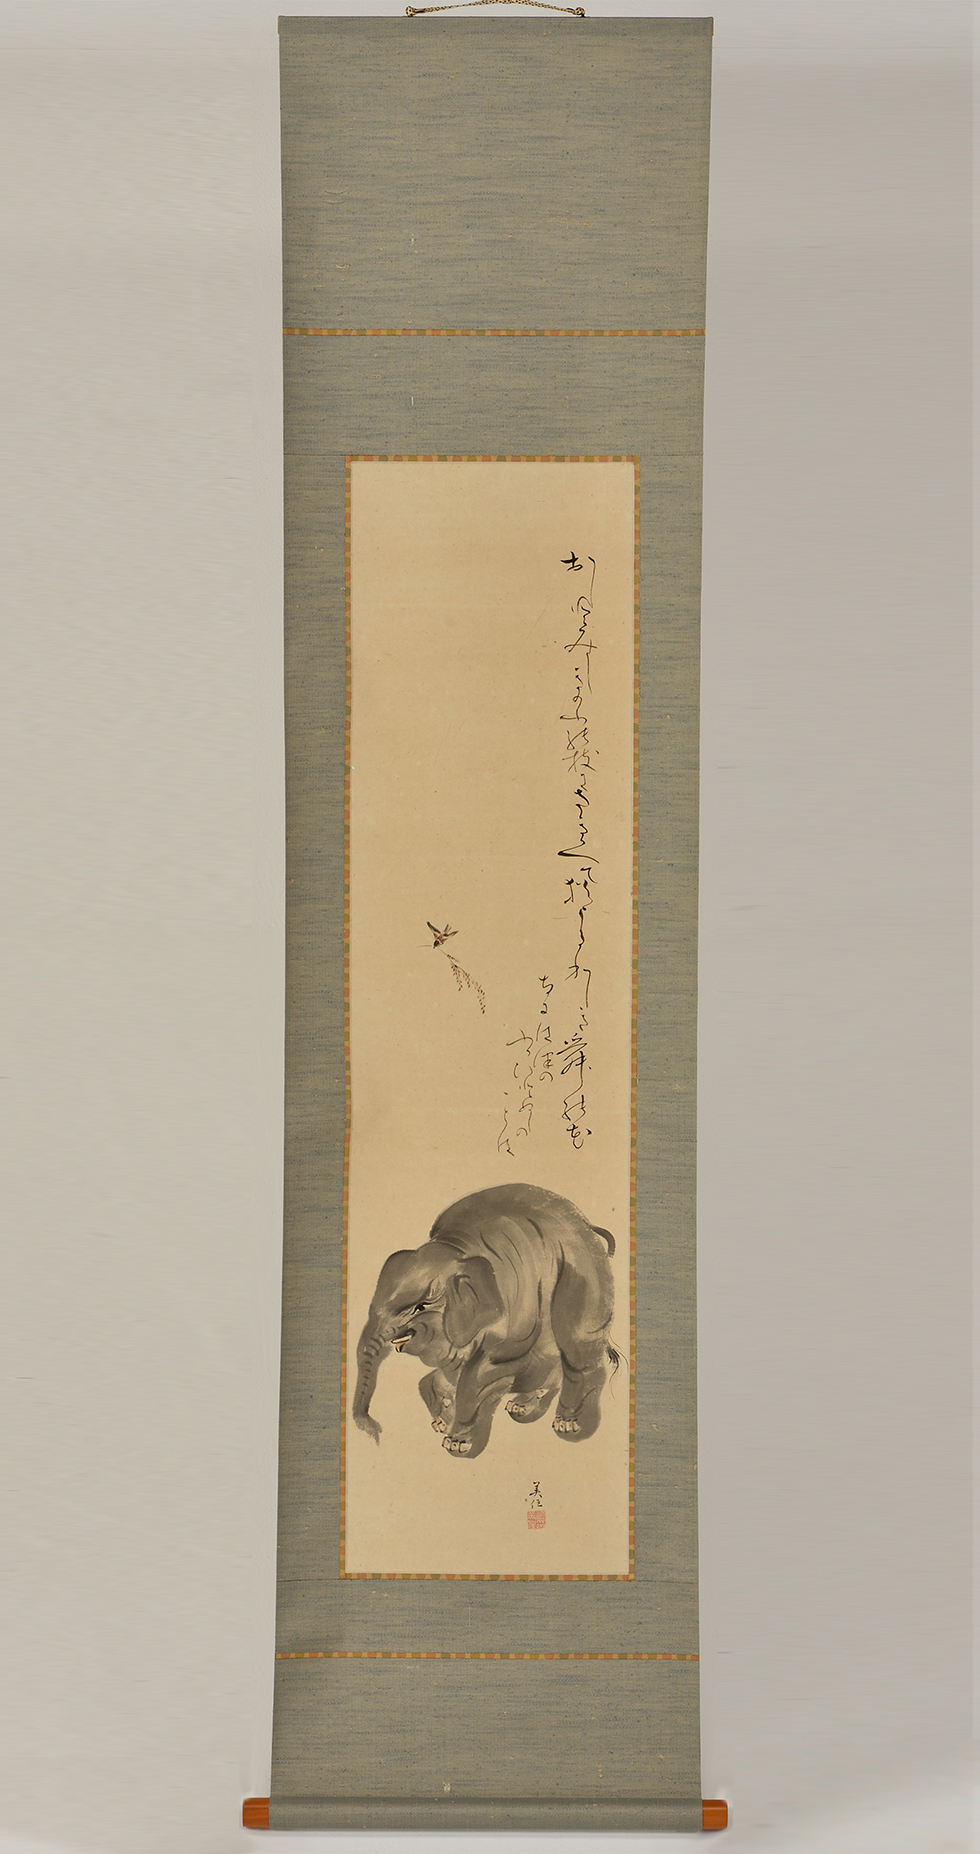 Hanging scroll “Elephant” with seal